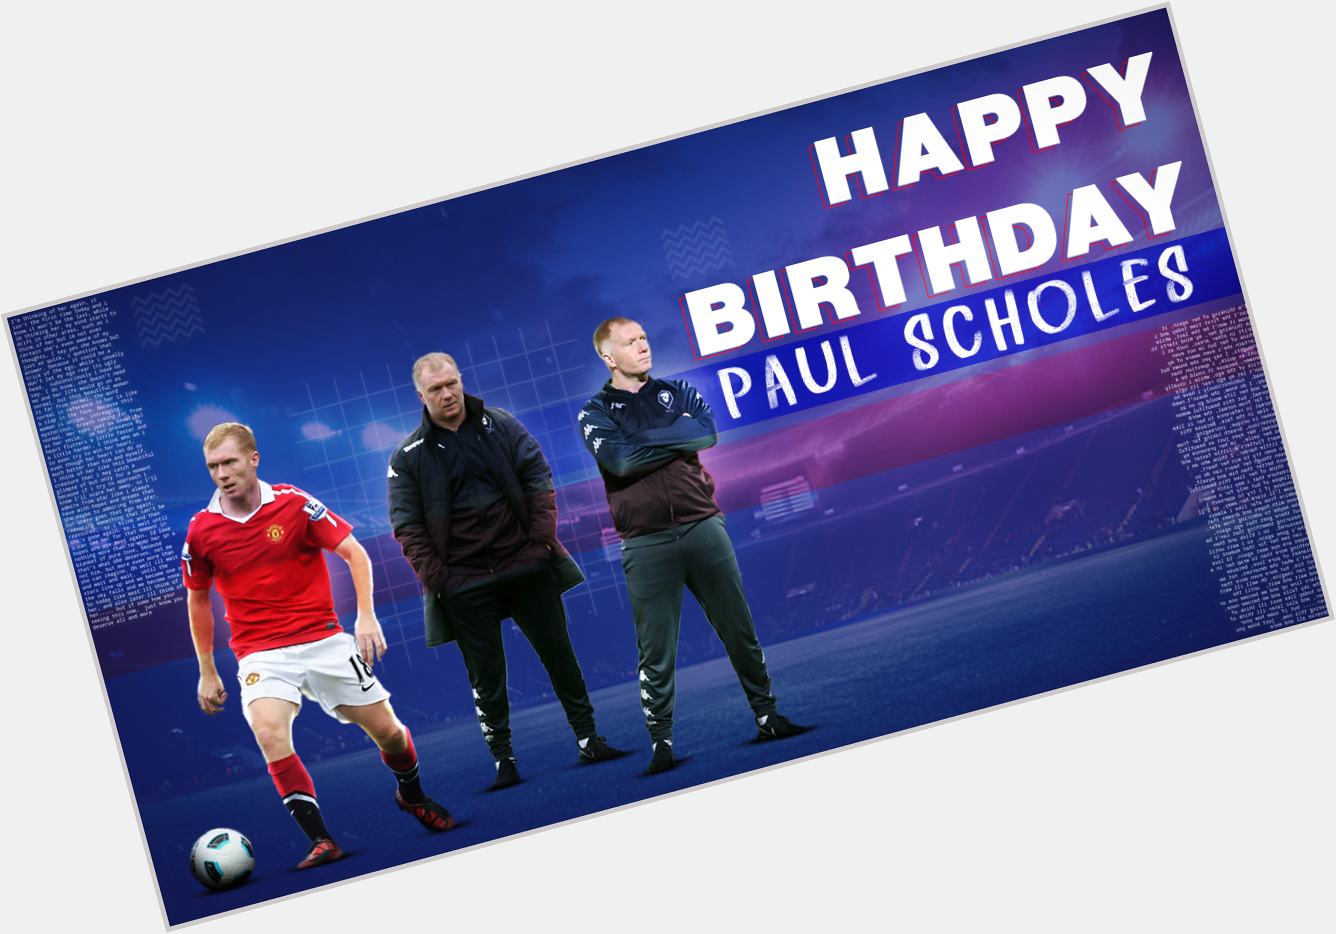 Happy Birthday Paul Scholes, one of United\s finest attackers.
.
.
.
. 